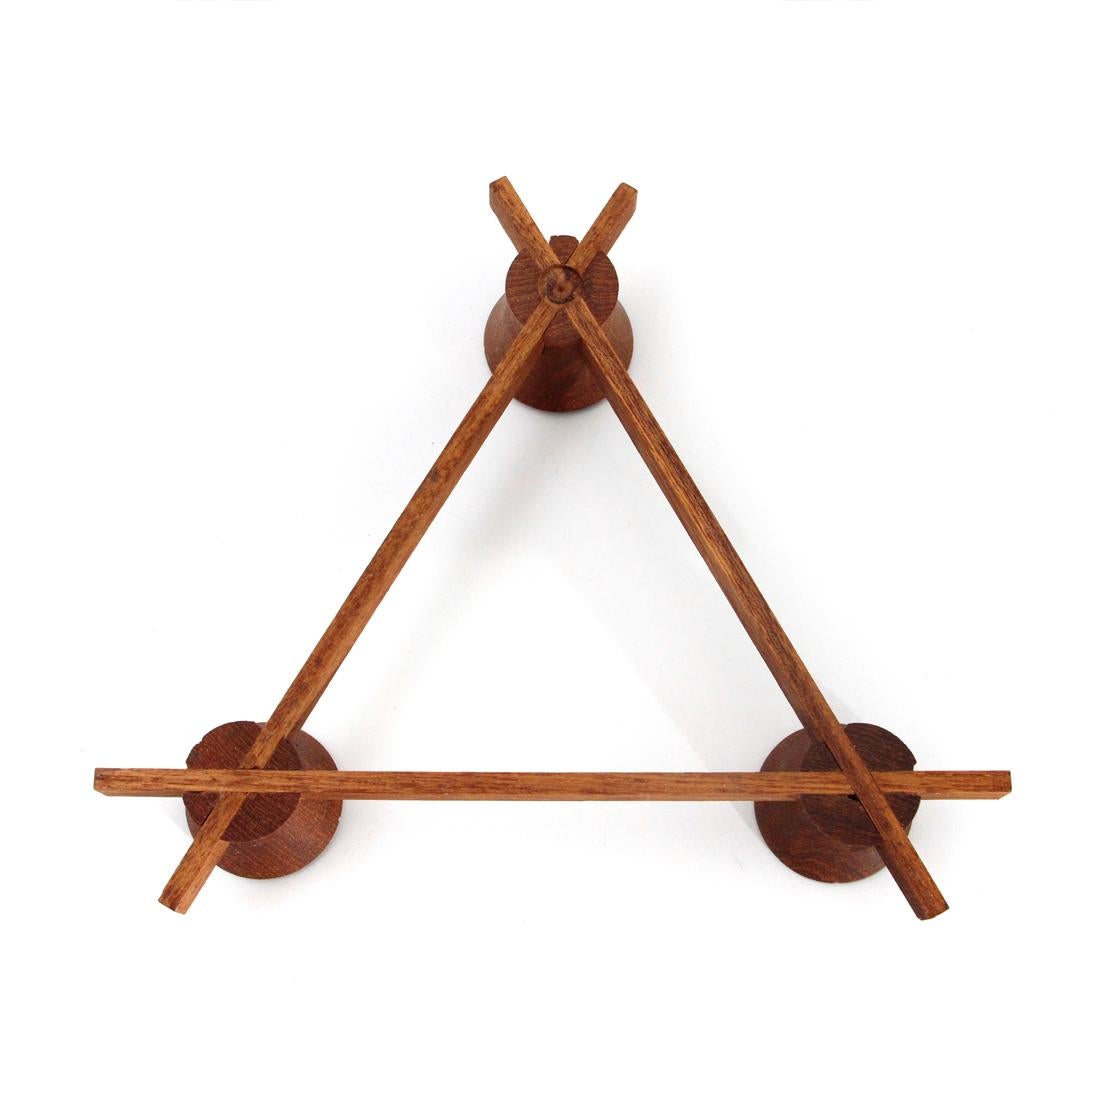 Midcentury Triangular Teak and Brass Italian Candleholder by Anri Form, 1960s For Sale 2